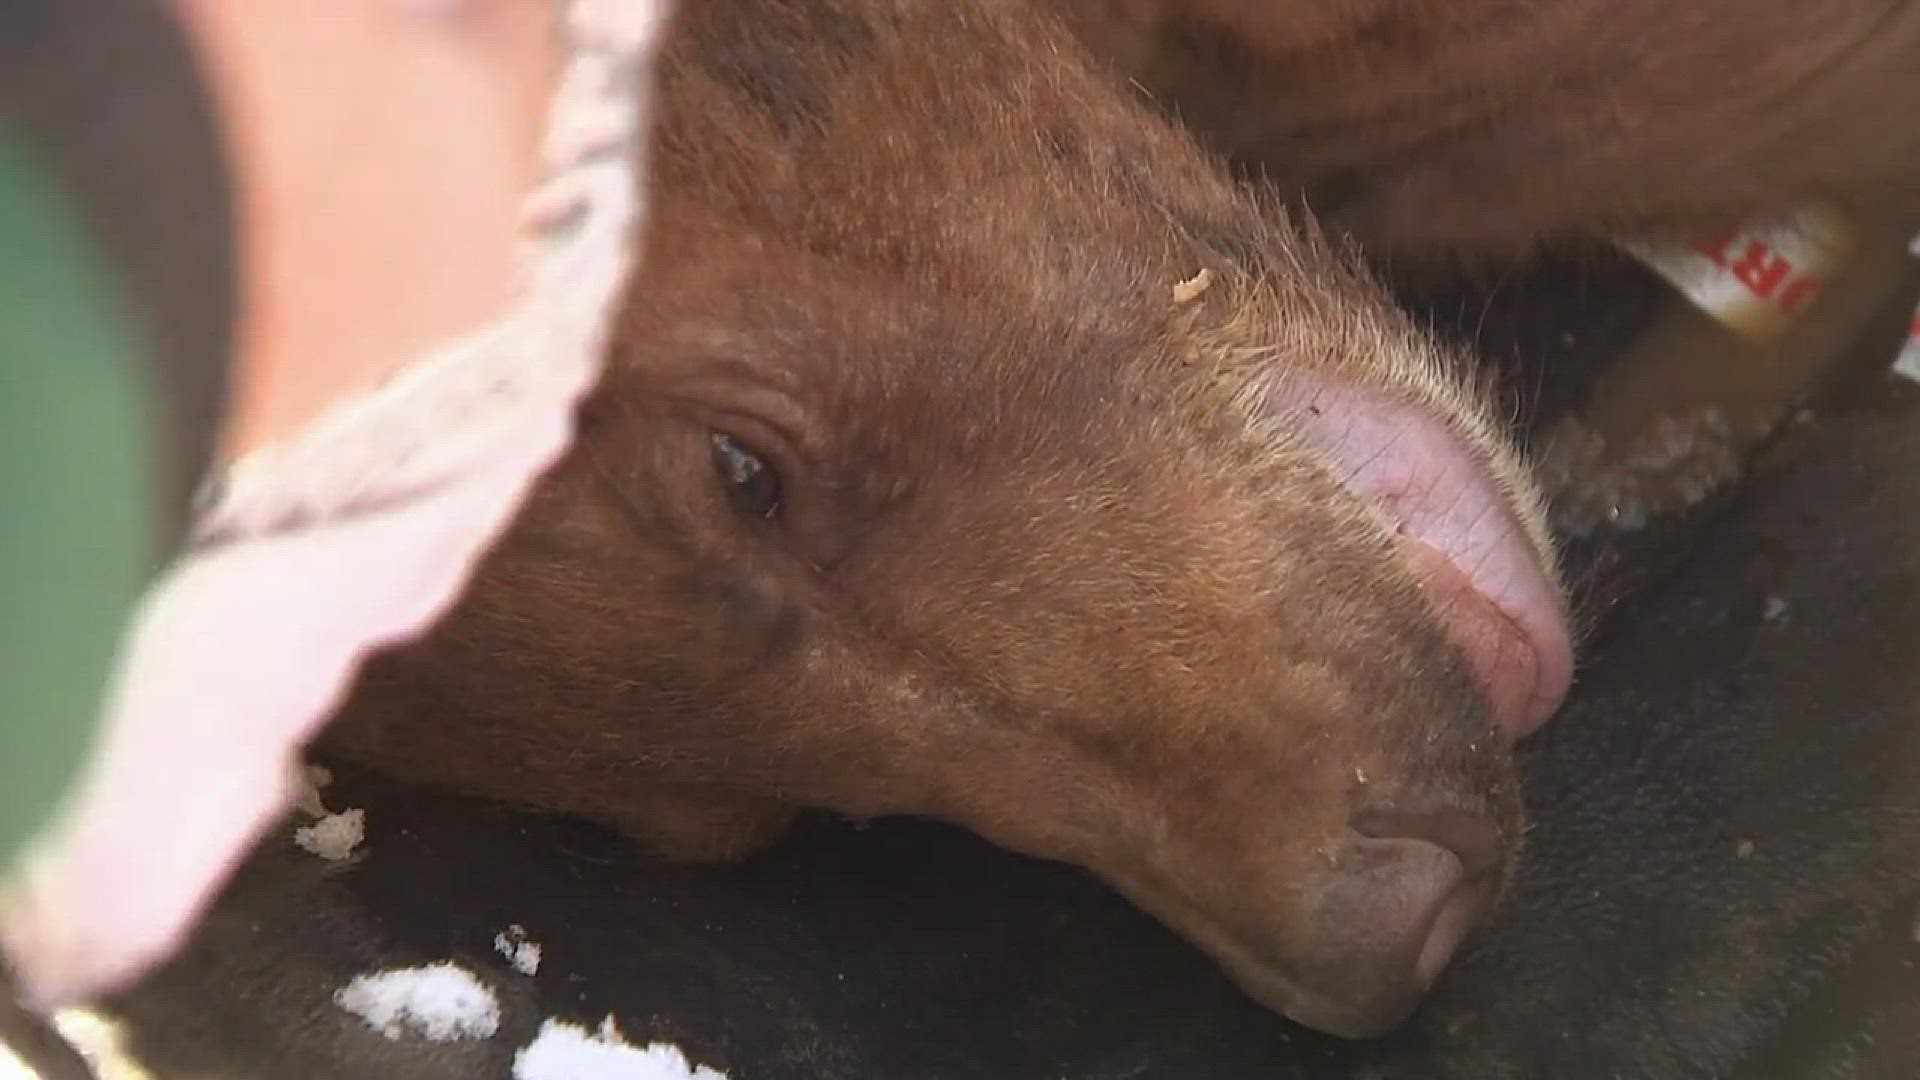 CPW officers released eight rehabilitated bear cubs on Pikes Peak Tuesday morning. They placed them in artificial dens where they hope the bears will stay through winter.